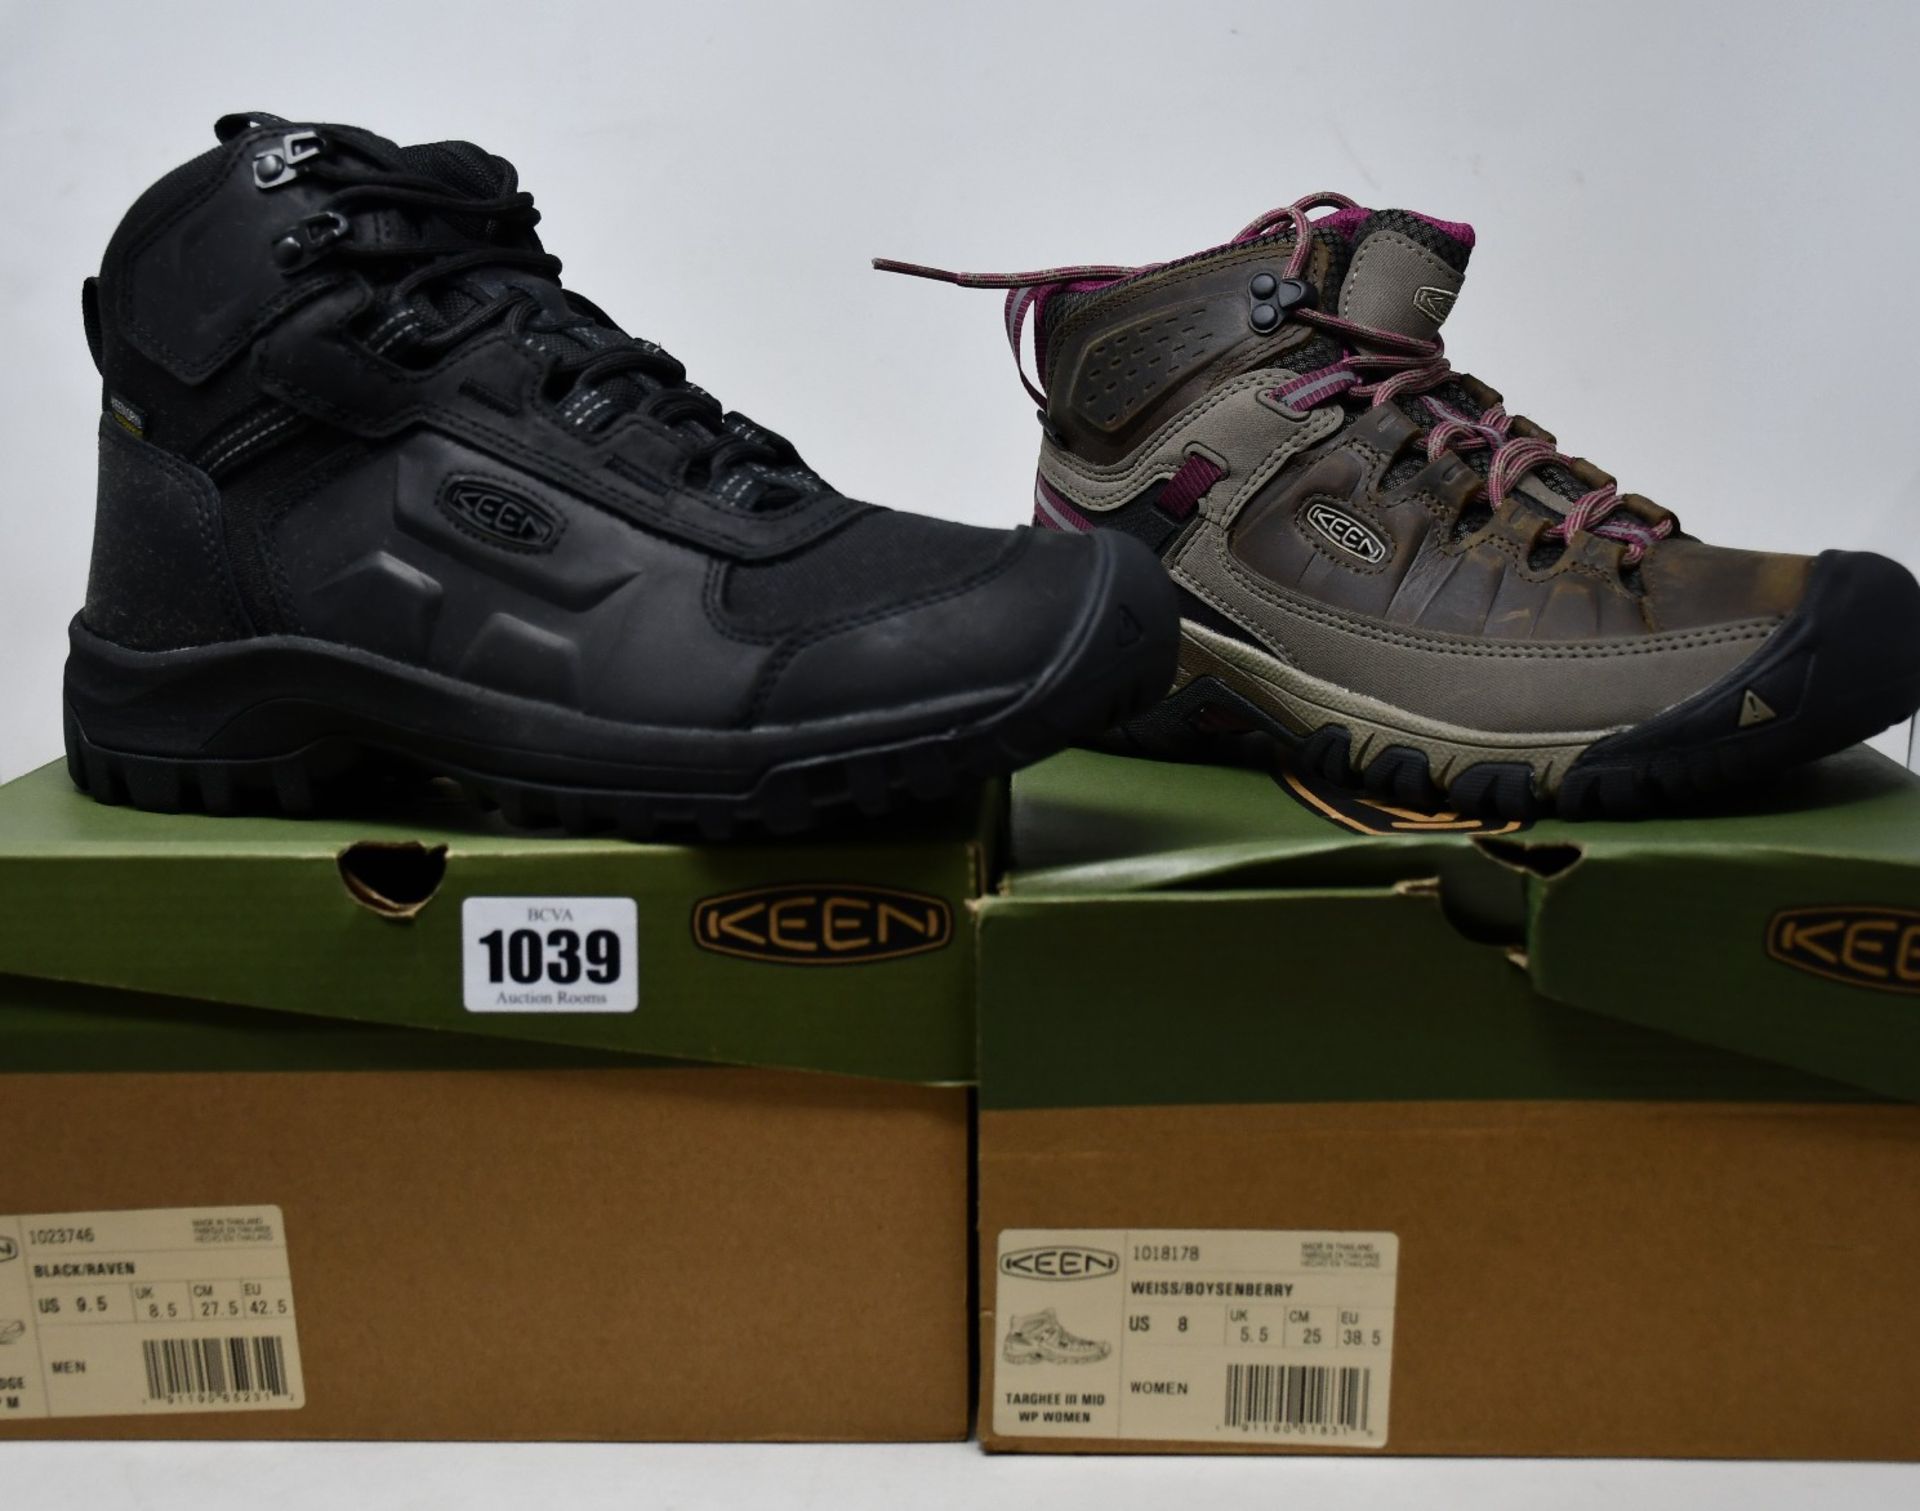 A pair of as new Keen Basin Ridge Mid waterproof boots (UK 8.5) and a pair of women's as new Keen